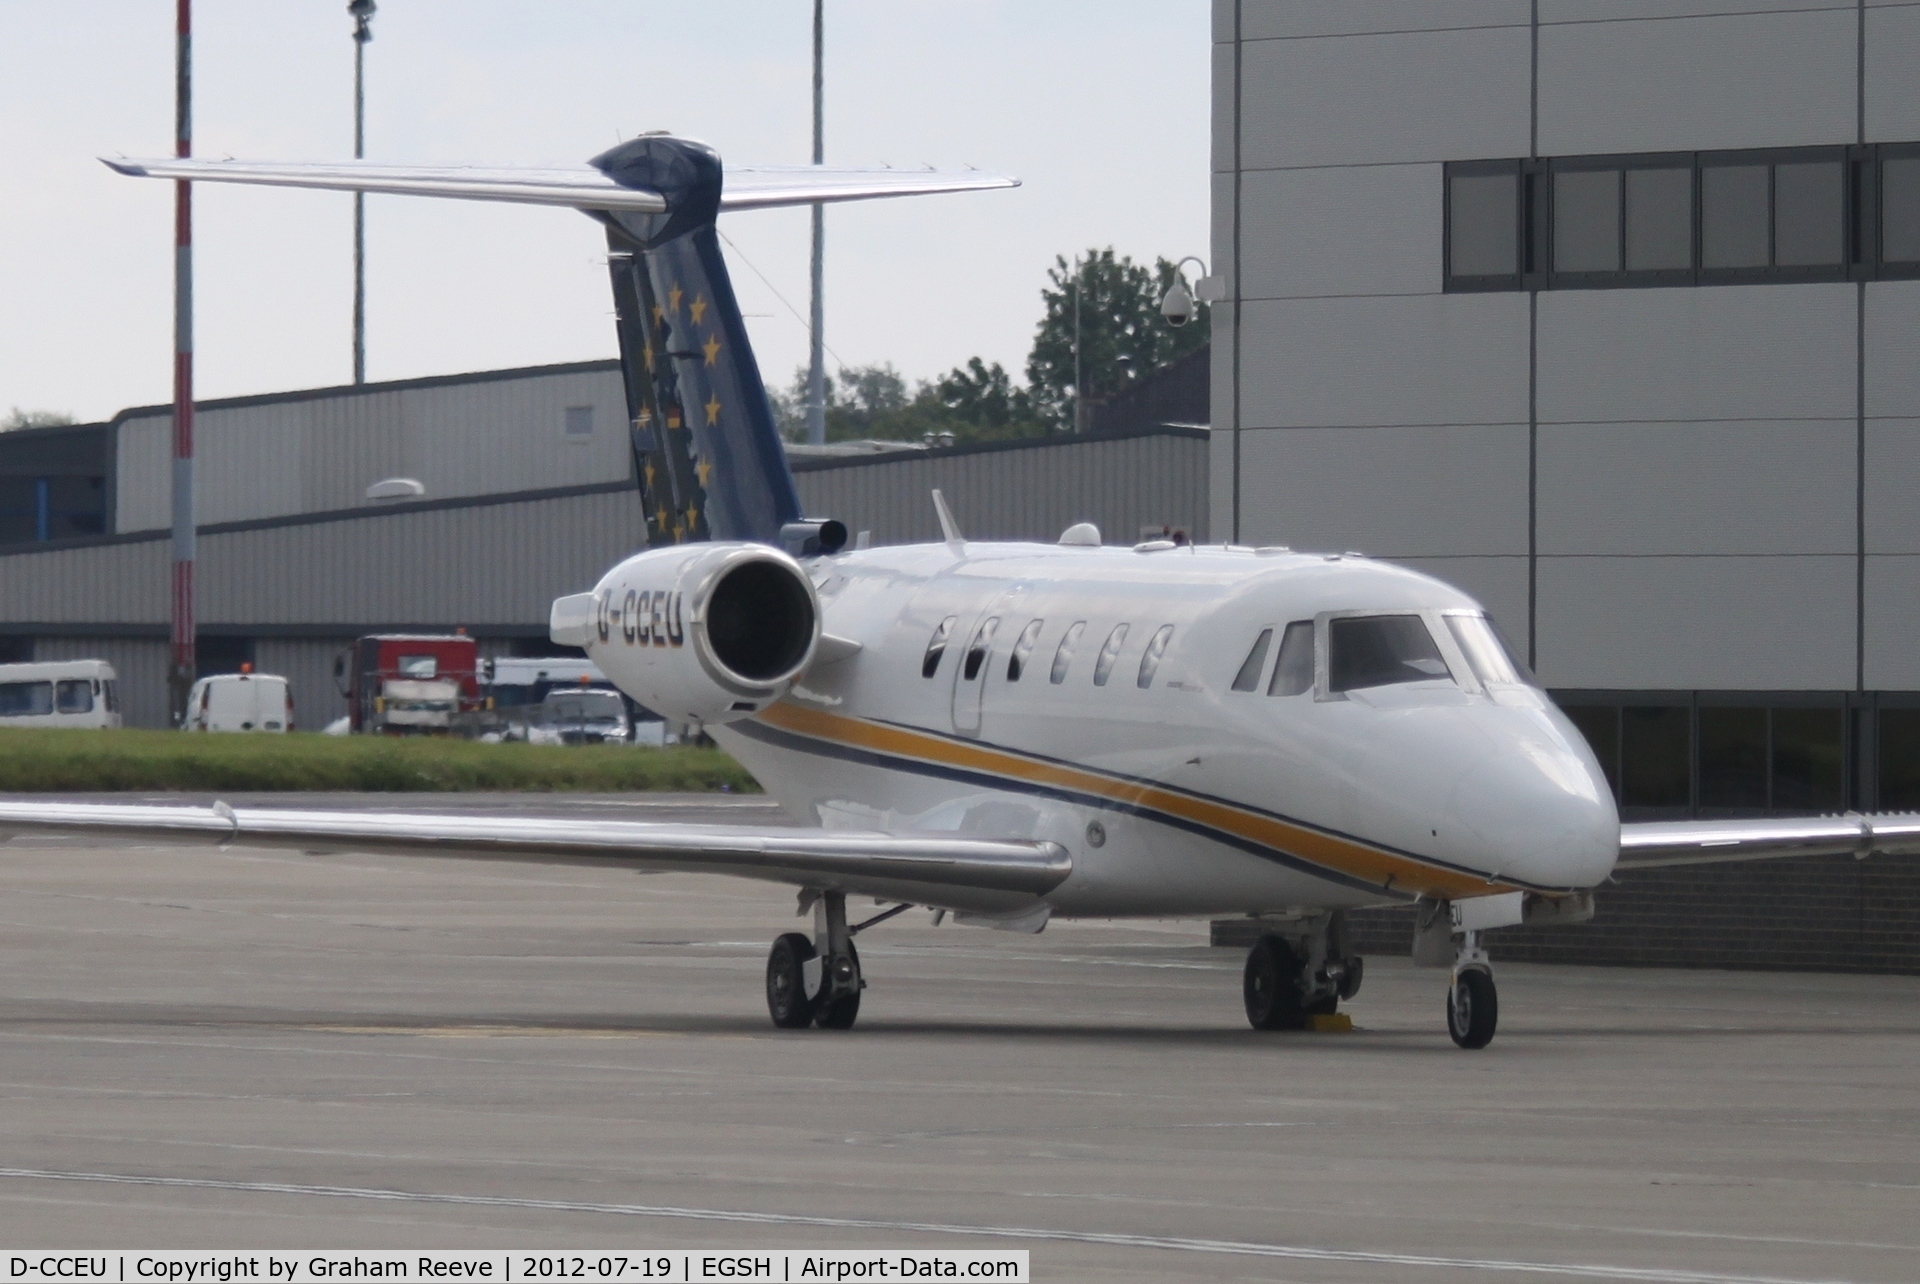 D-CCEU, 1990 Cessna 650 Citation III C/N 650-0190, Parked at Norwich.